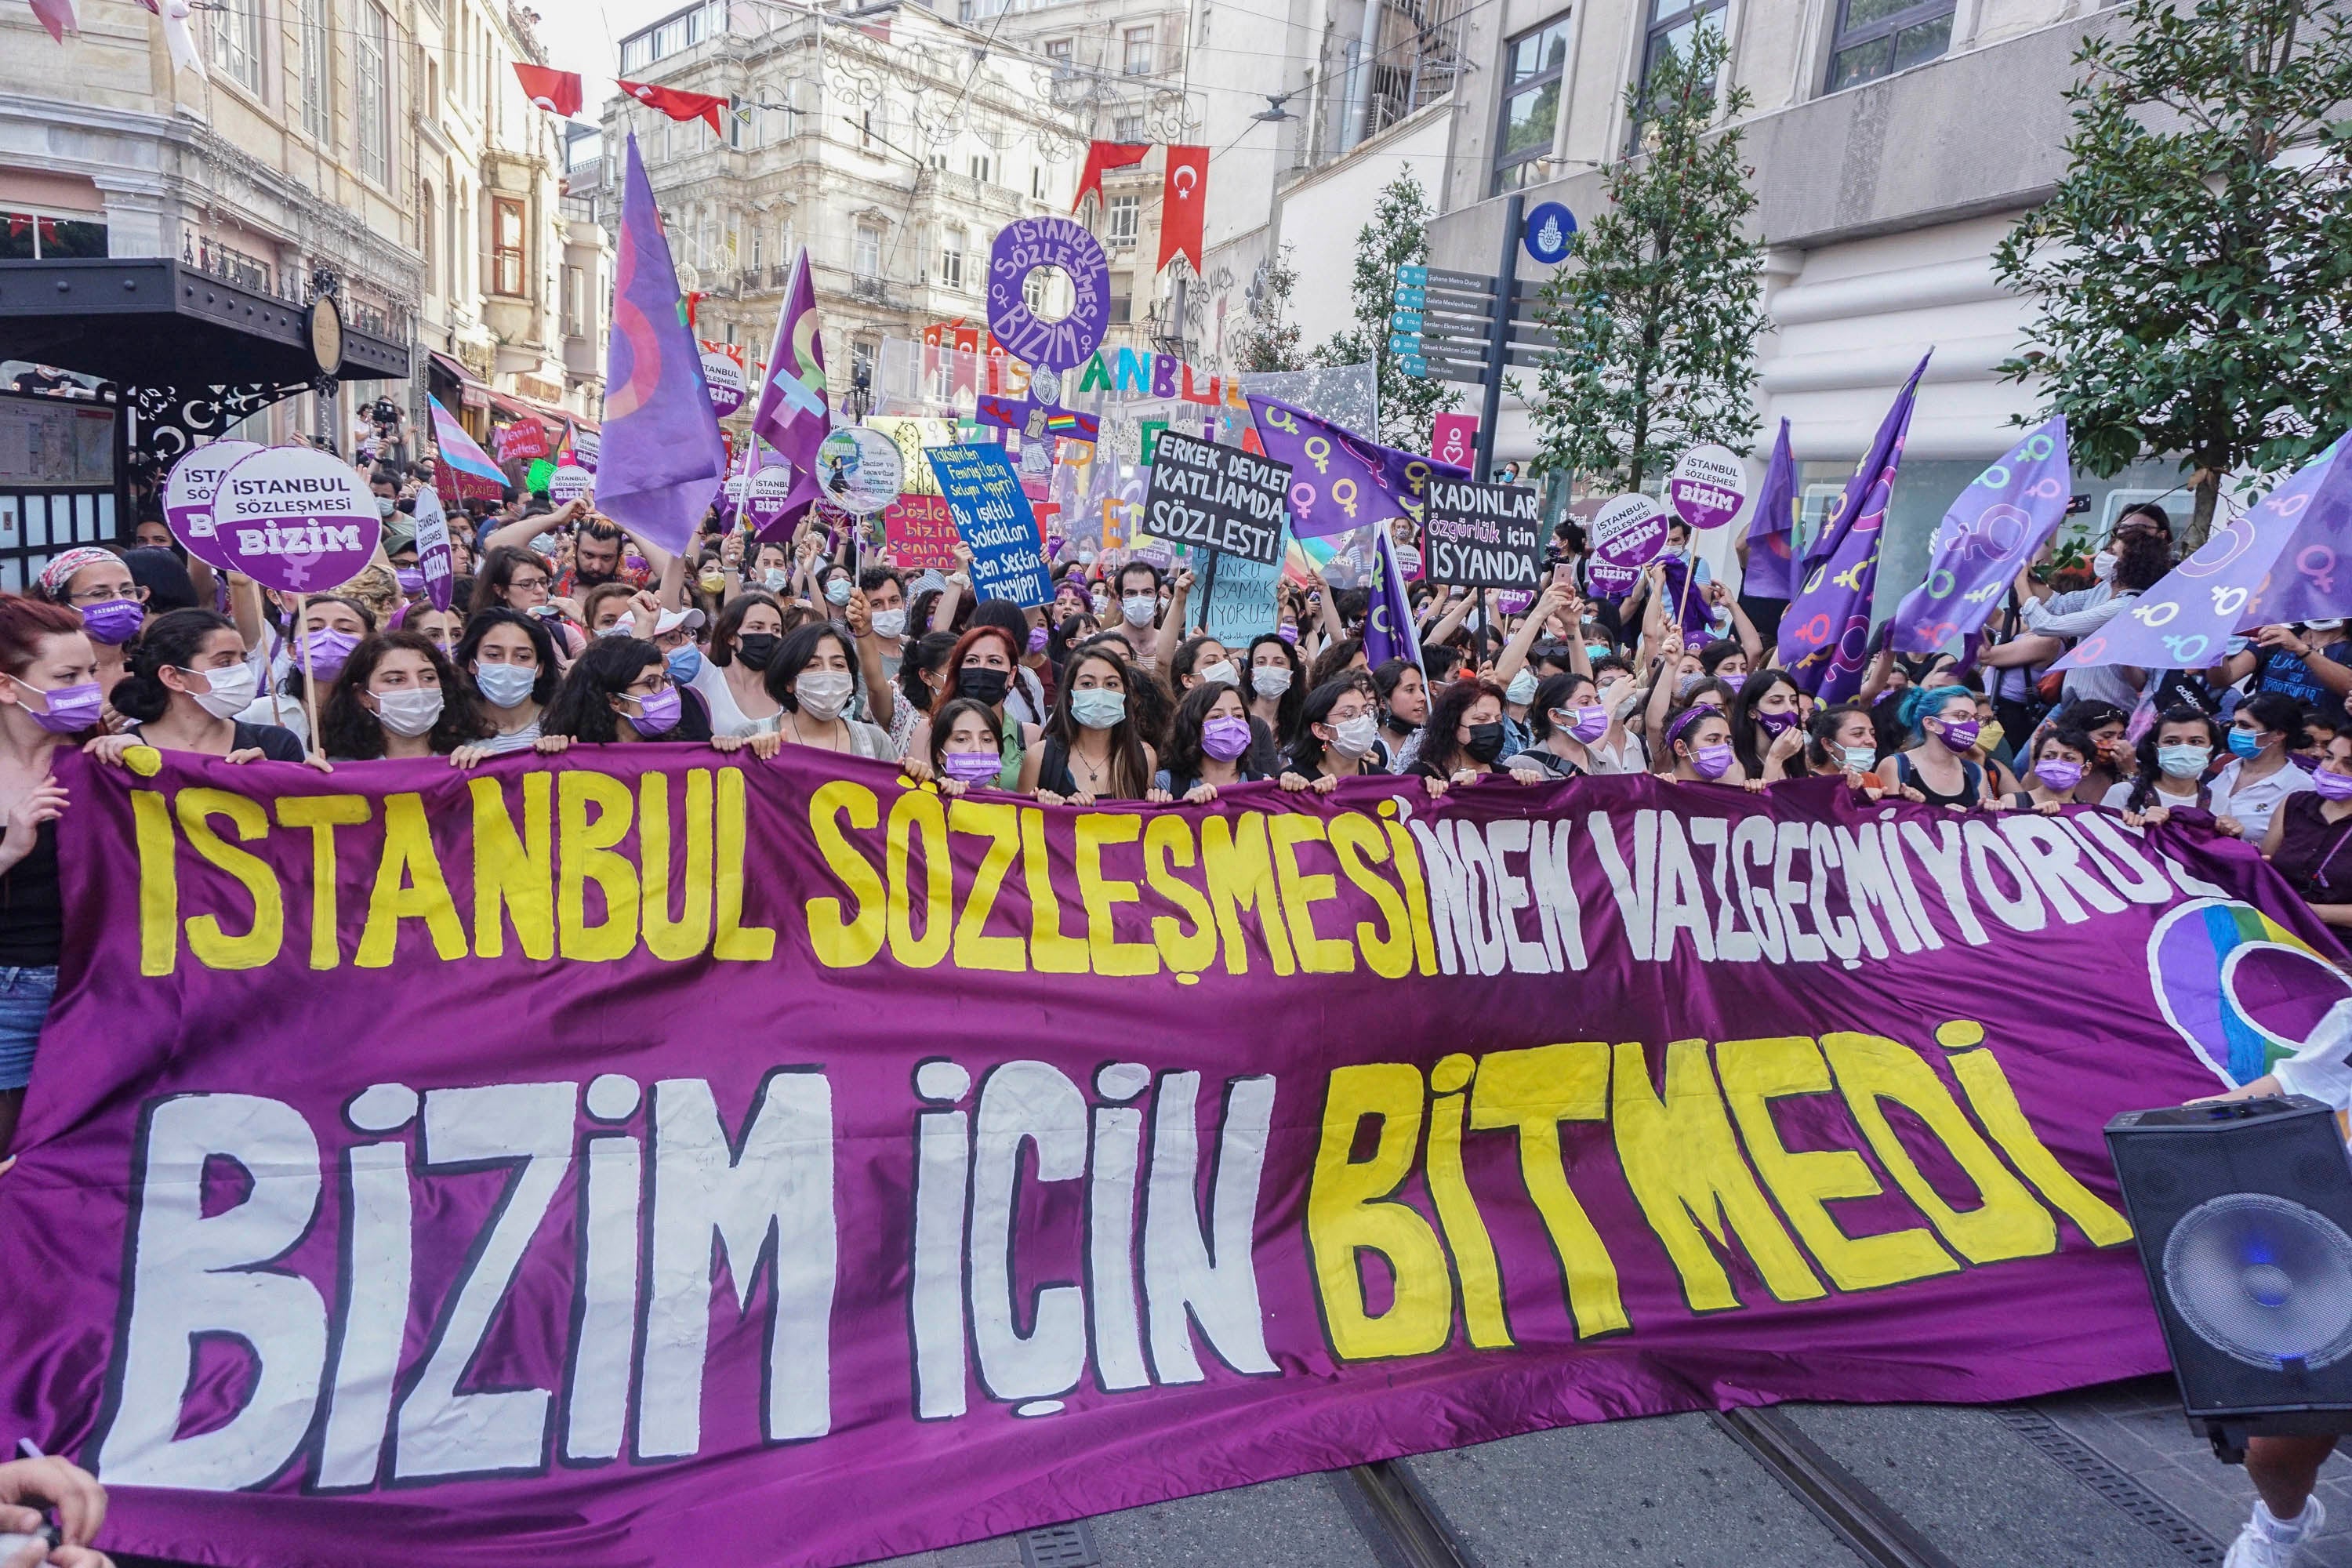 On March 20, 2021, President Recep Tayyip Erdoğan issued a decree withdrawing Turkey from the Council of Europe’s Convention on Preventing and Combating Violence Against Women and Domestic Violence, known as the Istanbul Convention, a groundbreaking treaty strongly supported by the women’s rights movement in Turkey. Protesters hold a banner reading "We are not giving up on the Istanbul Convention. It's not over for us." Istanbul/Turkey July 1, 2021